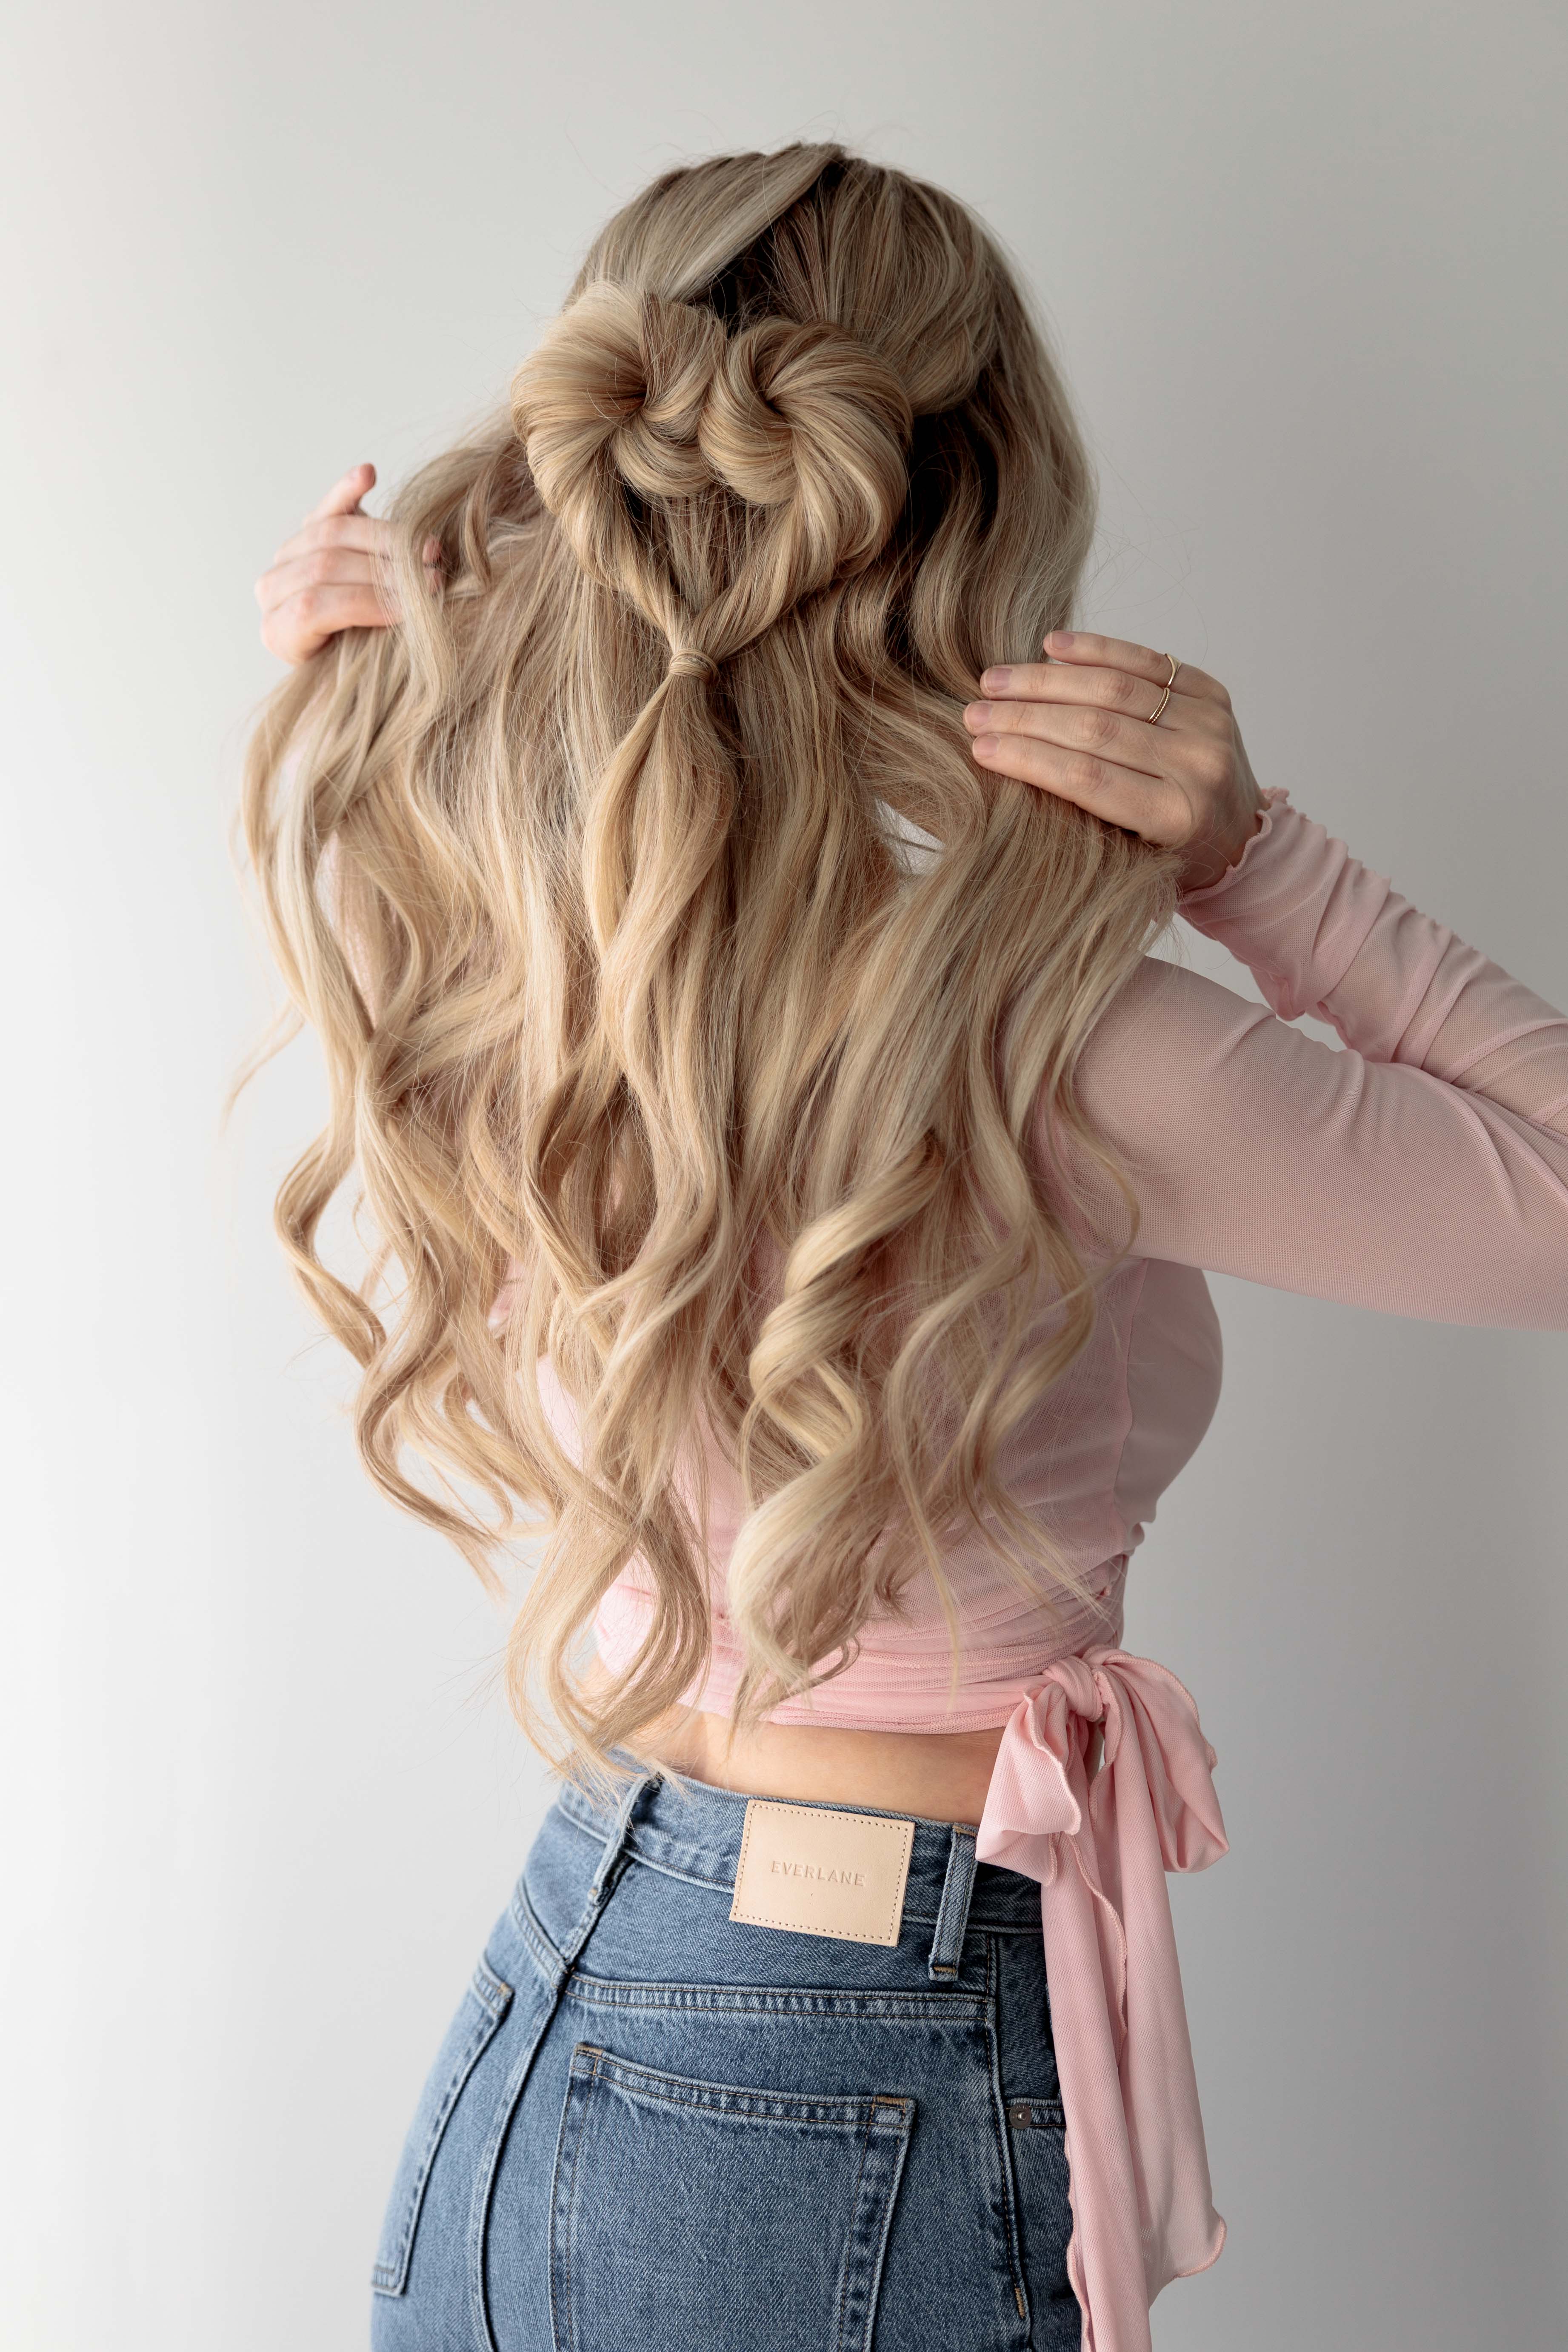 girl with heart-shaped braid hairstyle